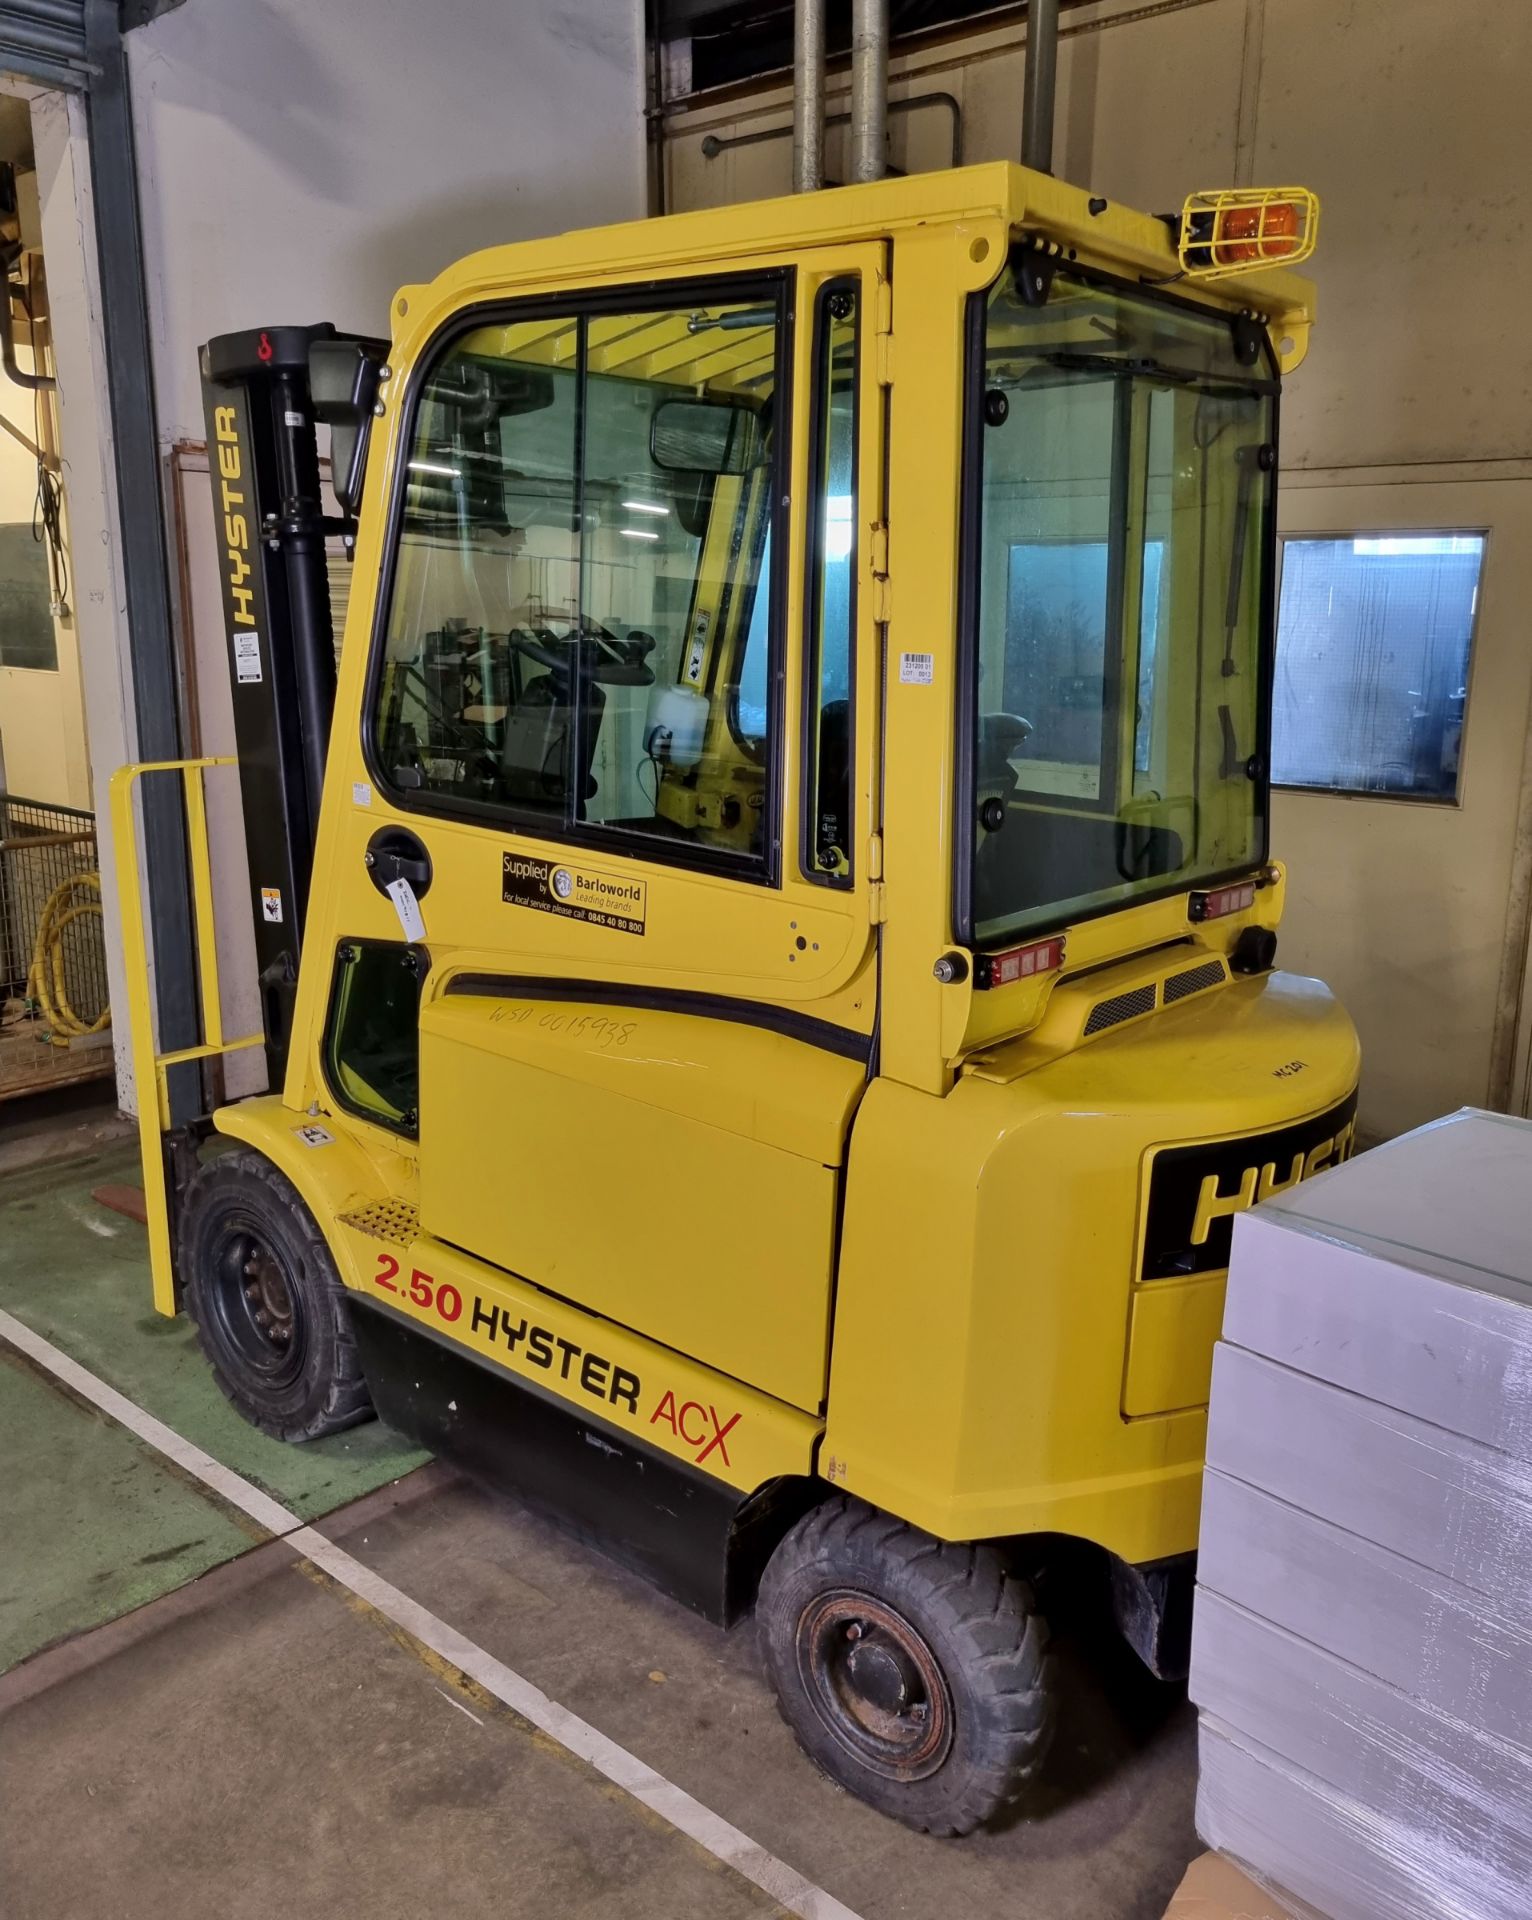 Hyster ACX J2.50XM-717 4-wheel electric forklift truck - year of manufacture 2008 - Image 4 of 21